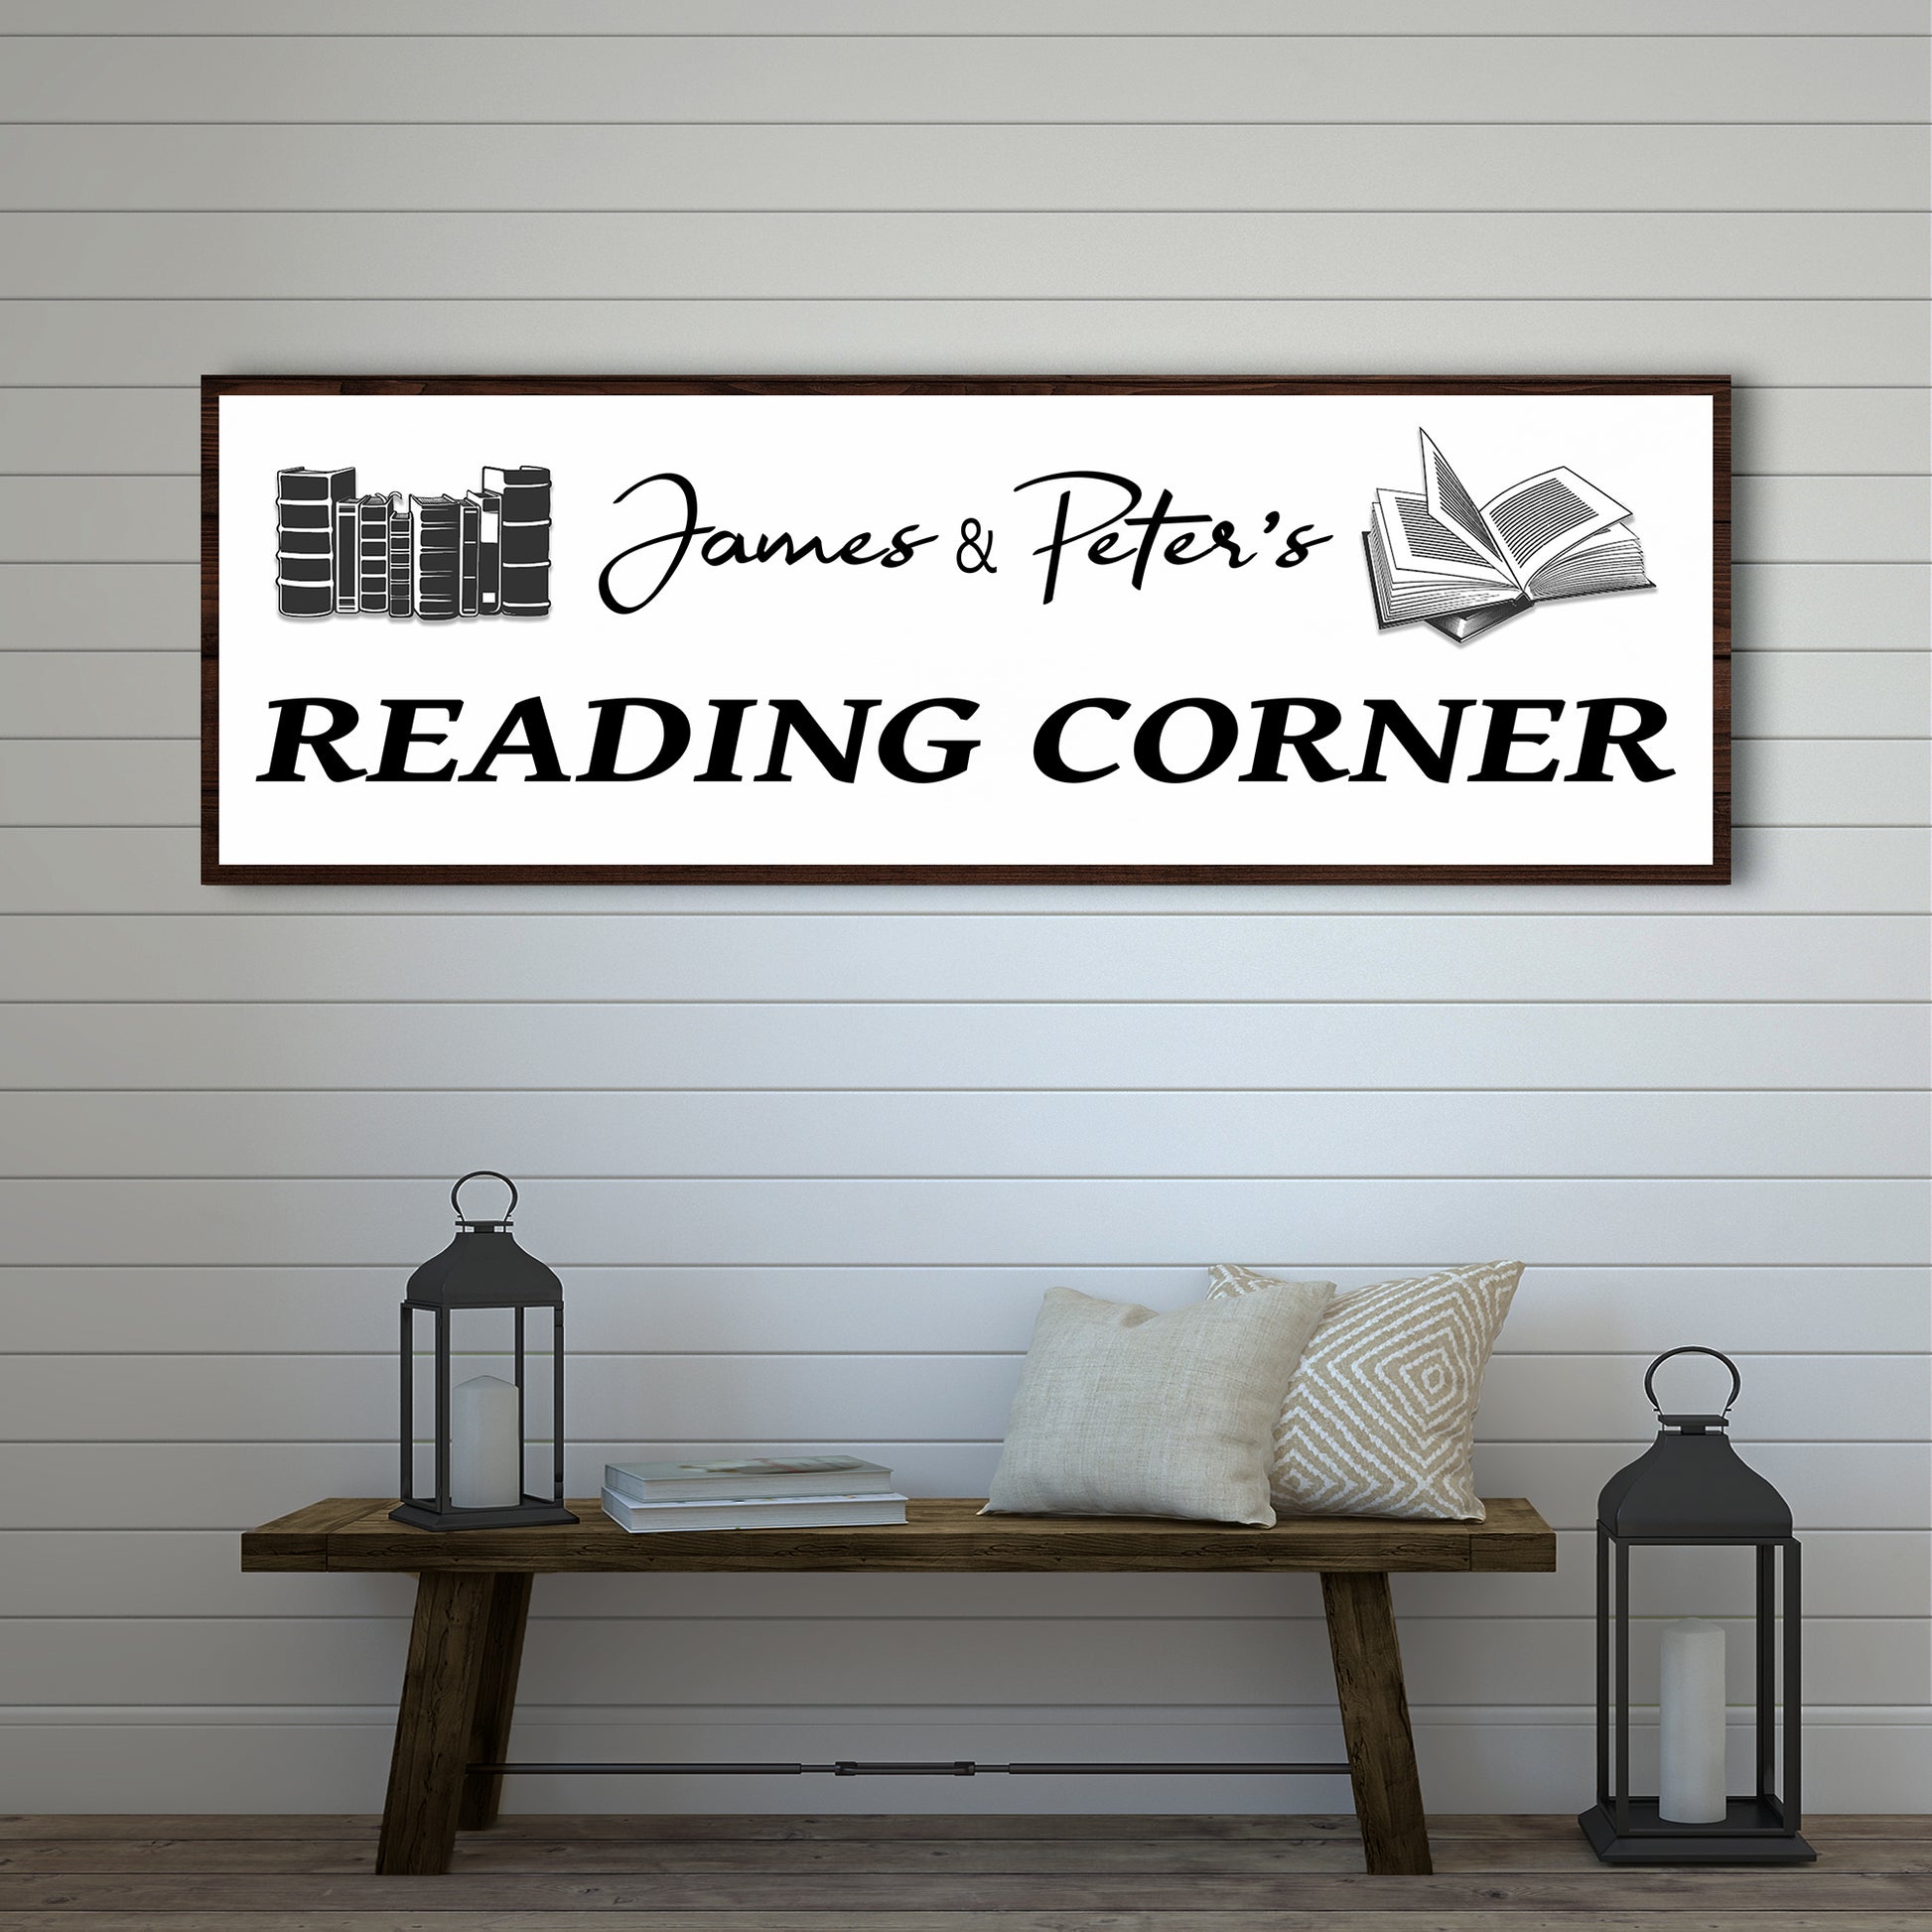 Reading Corner Sign Style 1 - Image by Tailored Canvases